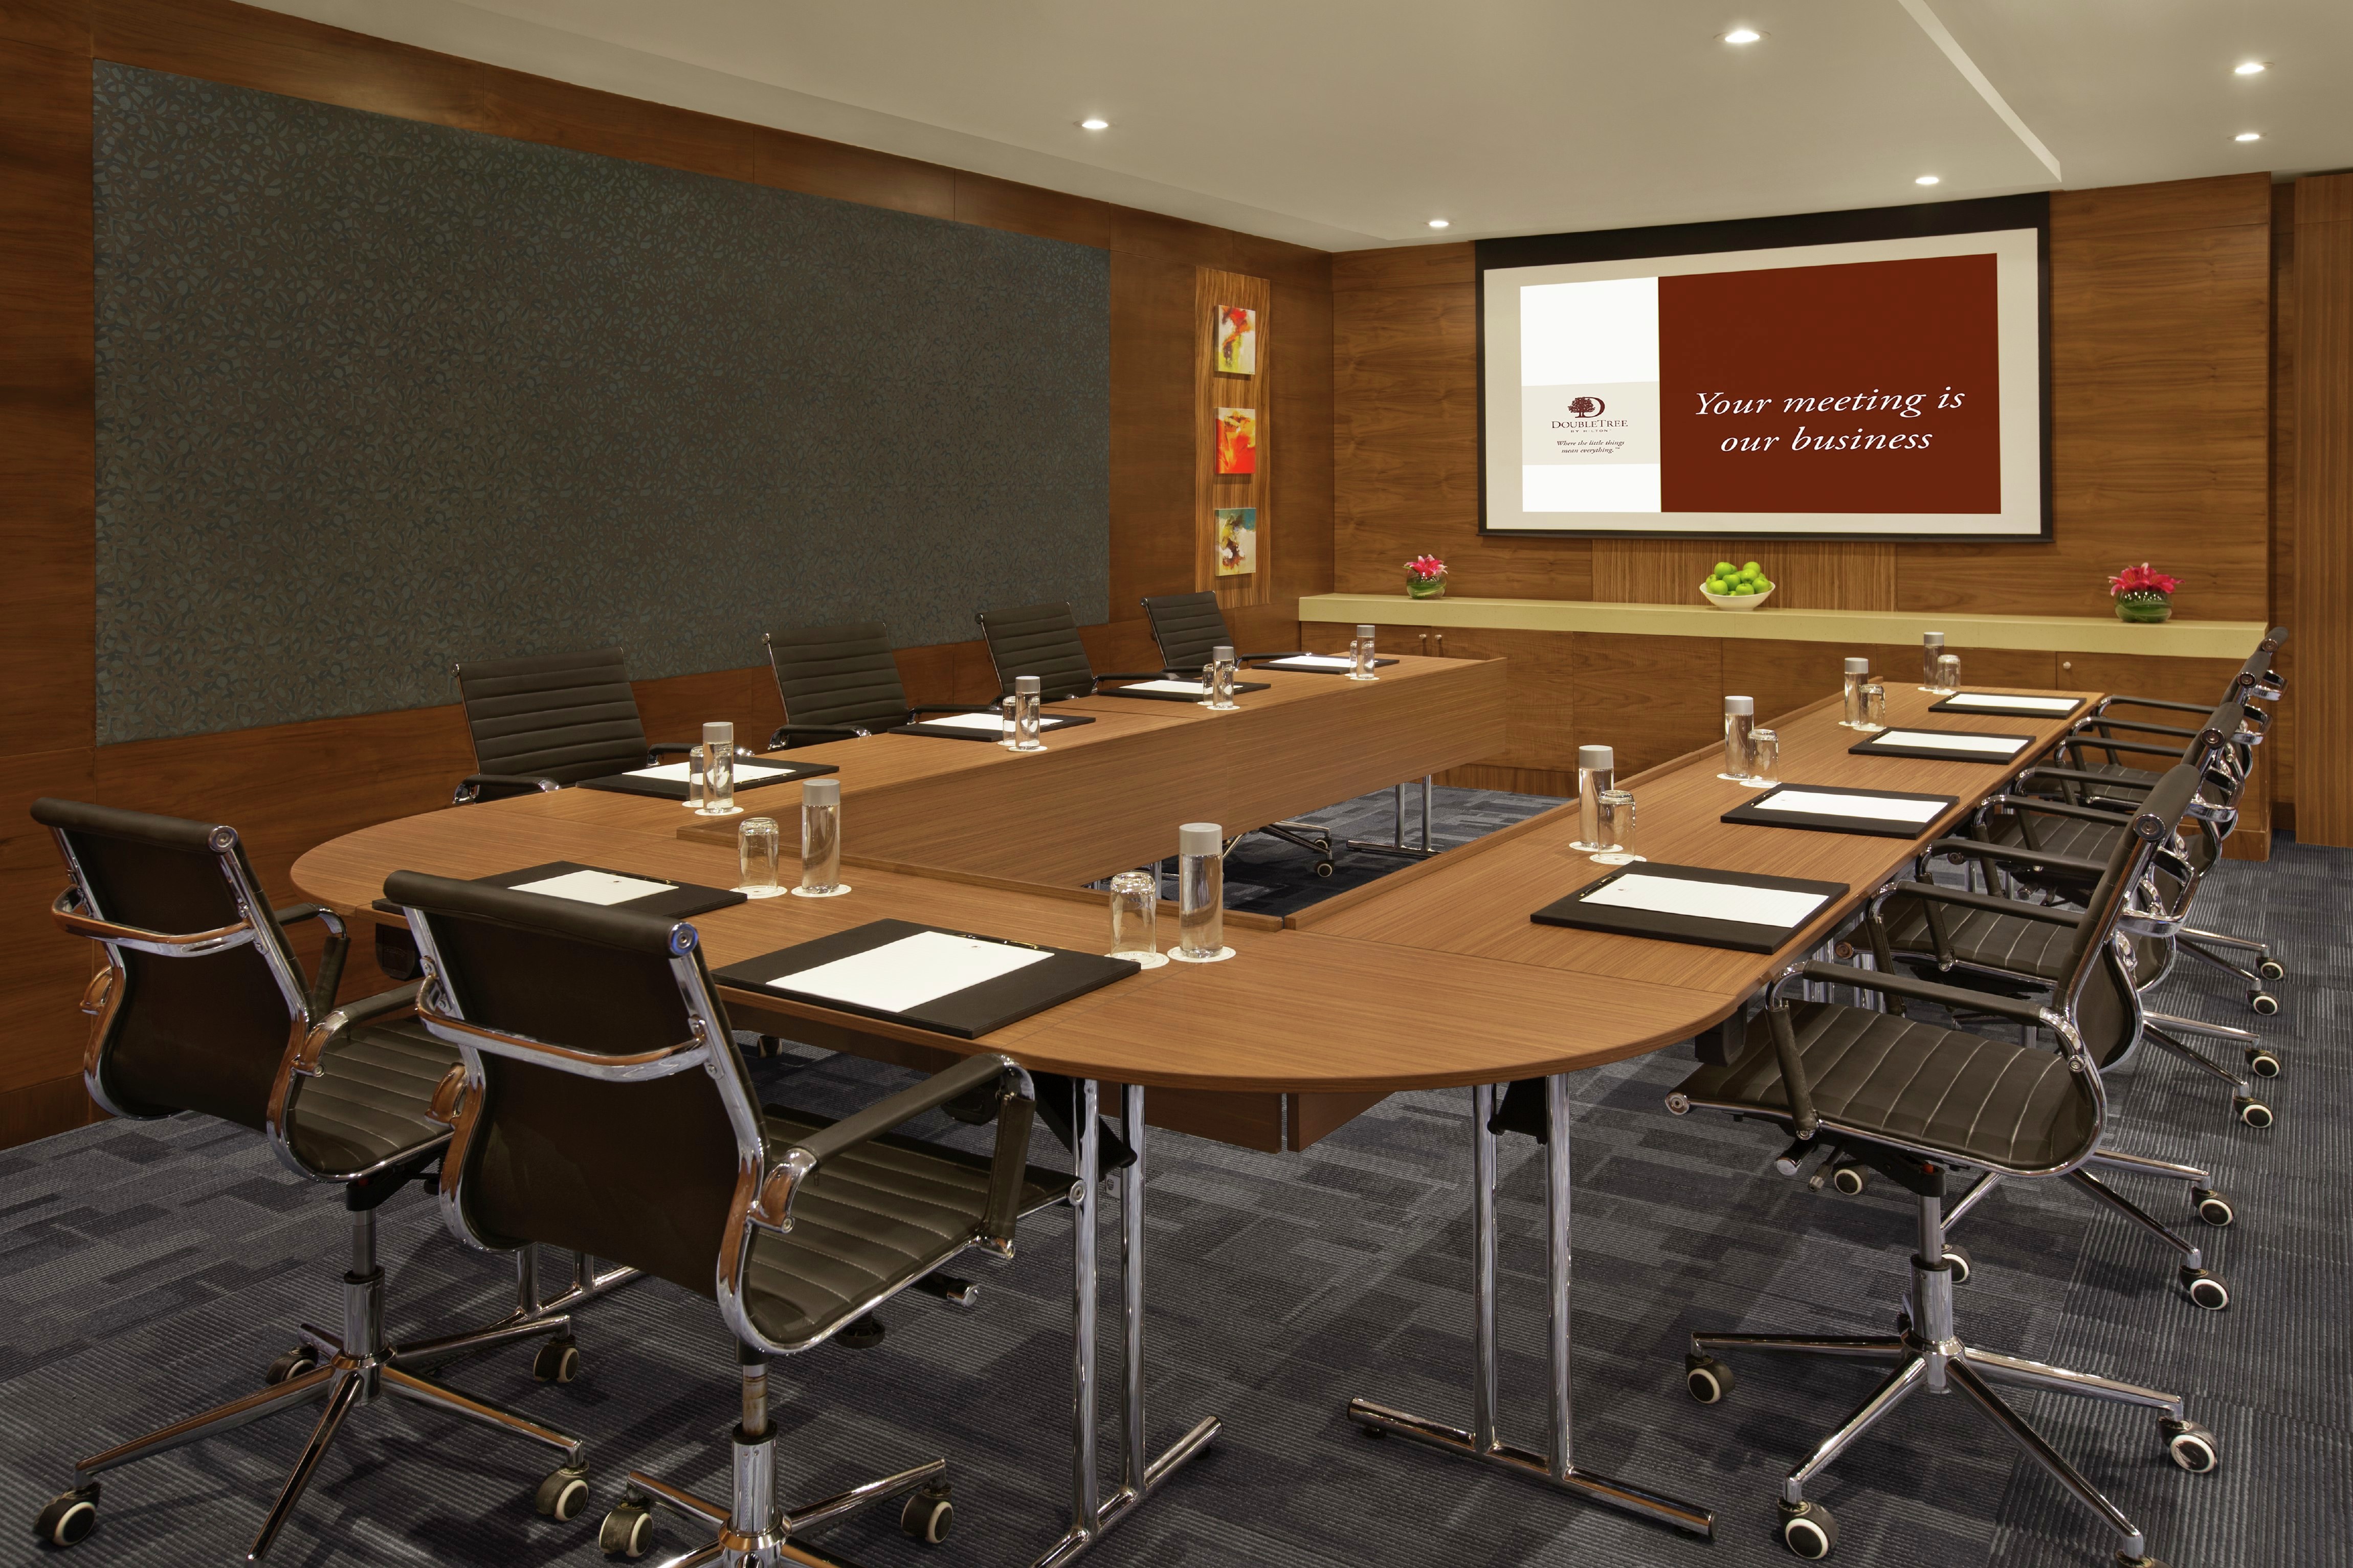 DoubleTree Meeting Room with U-Shaped Table, Chairs, and Room Technology